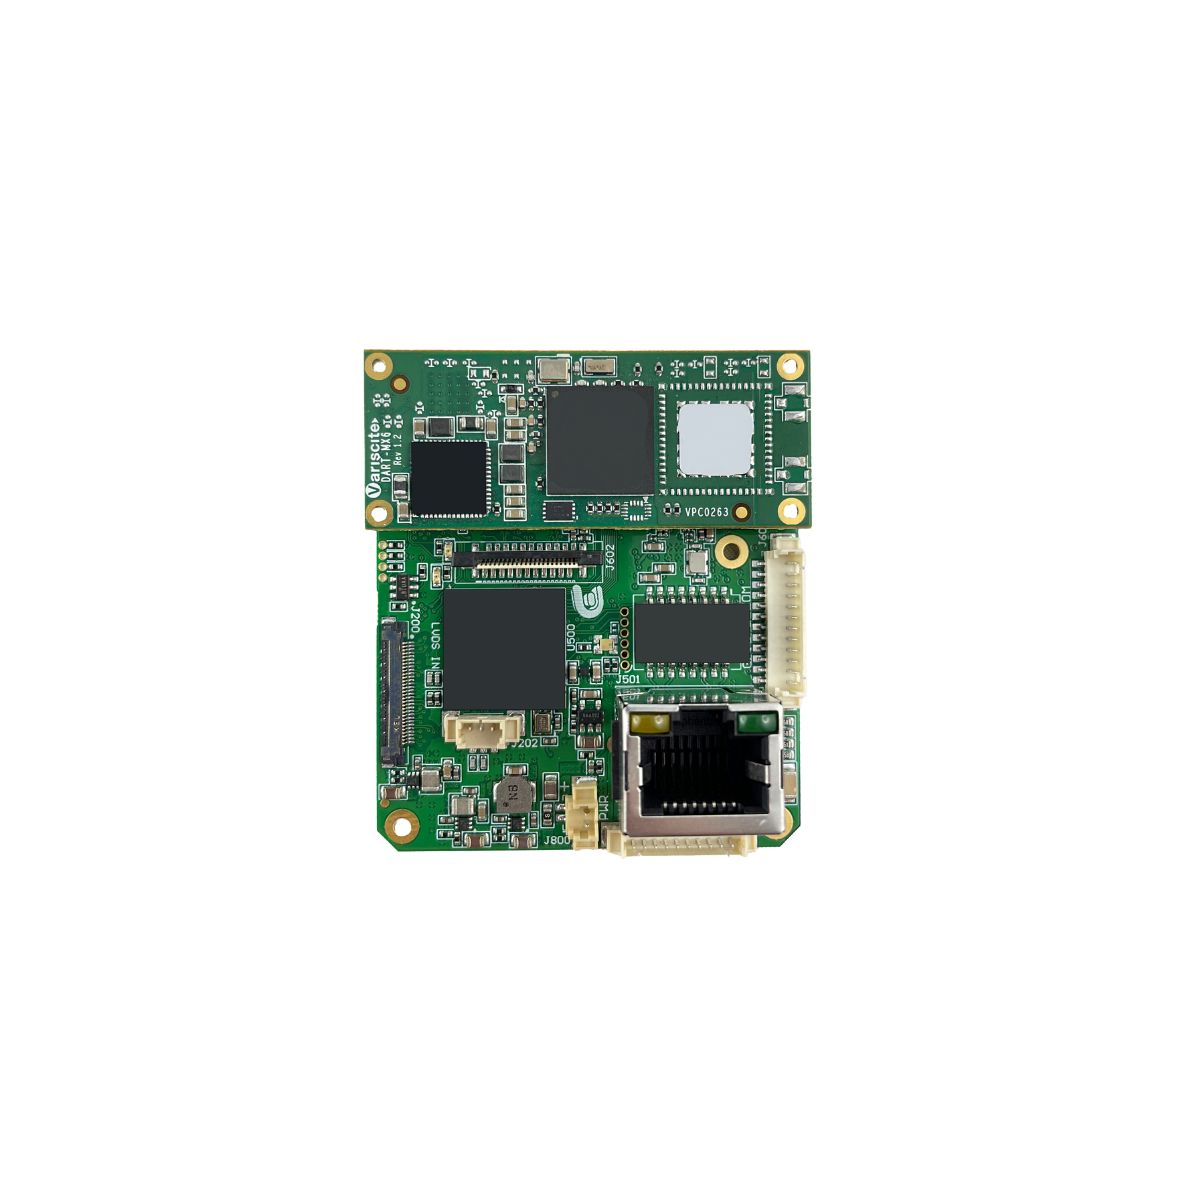 H.264/H.265 IP Video Streaming Interface Boards Top View